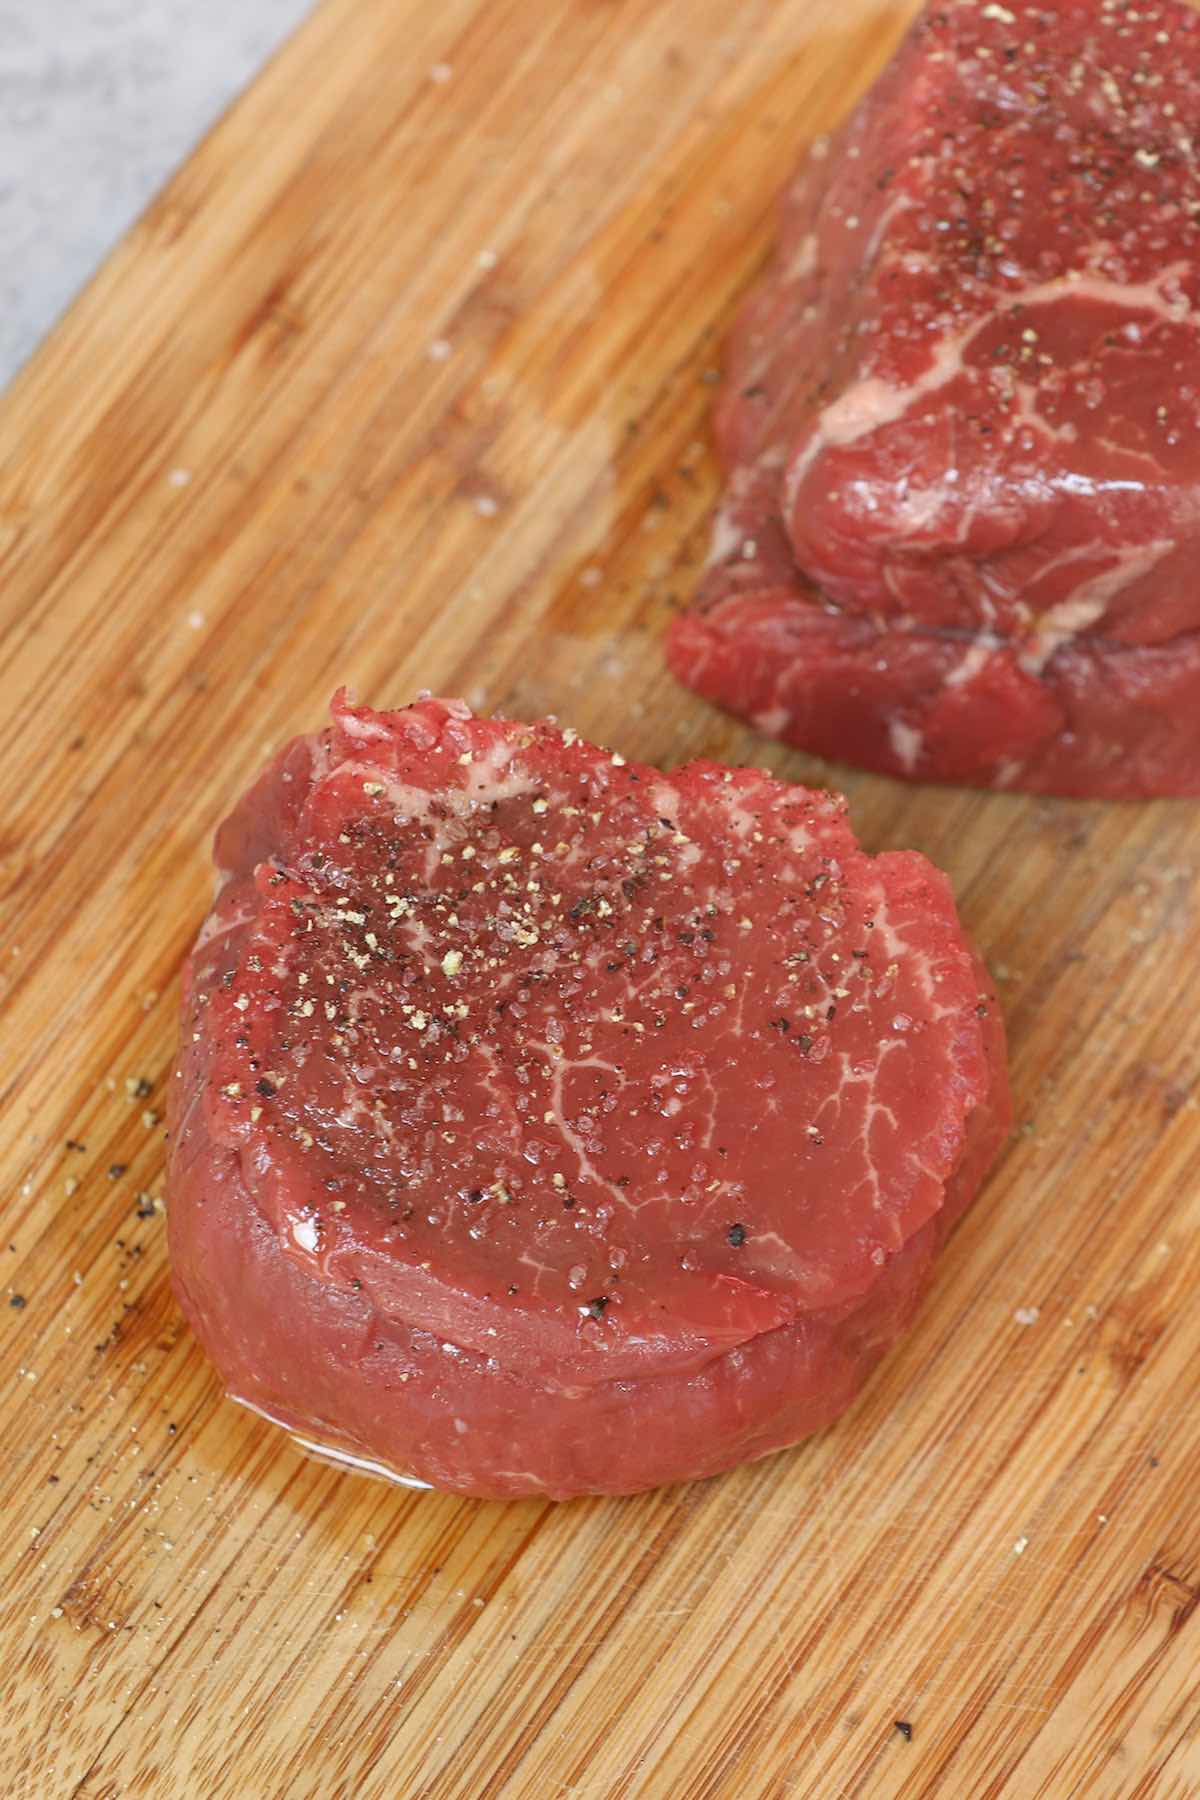 Filet mignon rubbed with oil, coarse salt and pepper before cooking